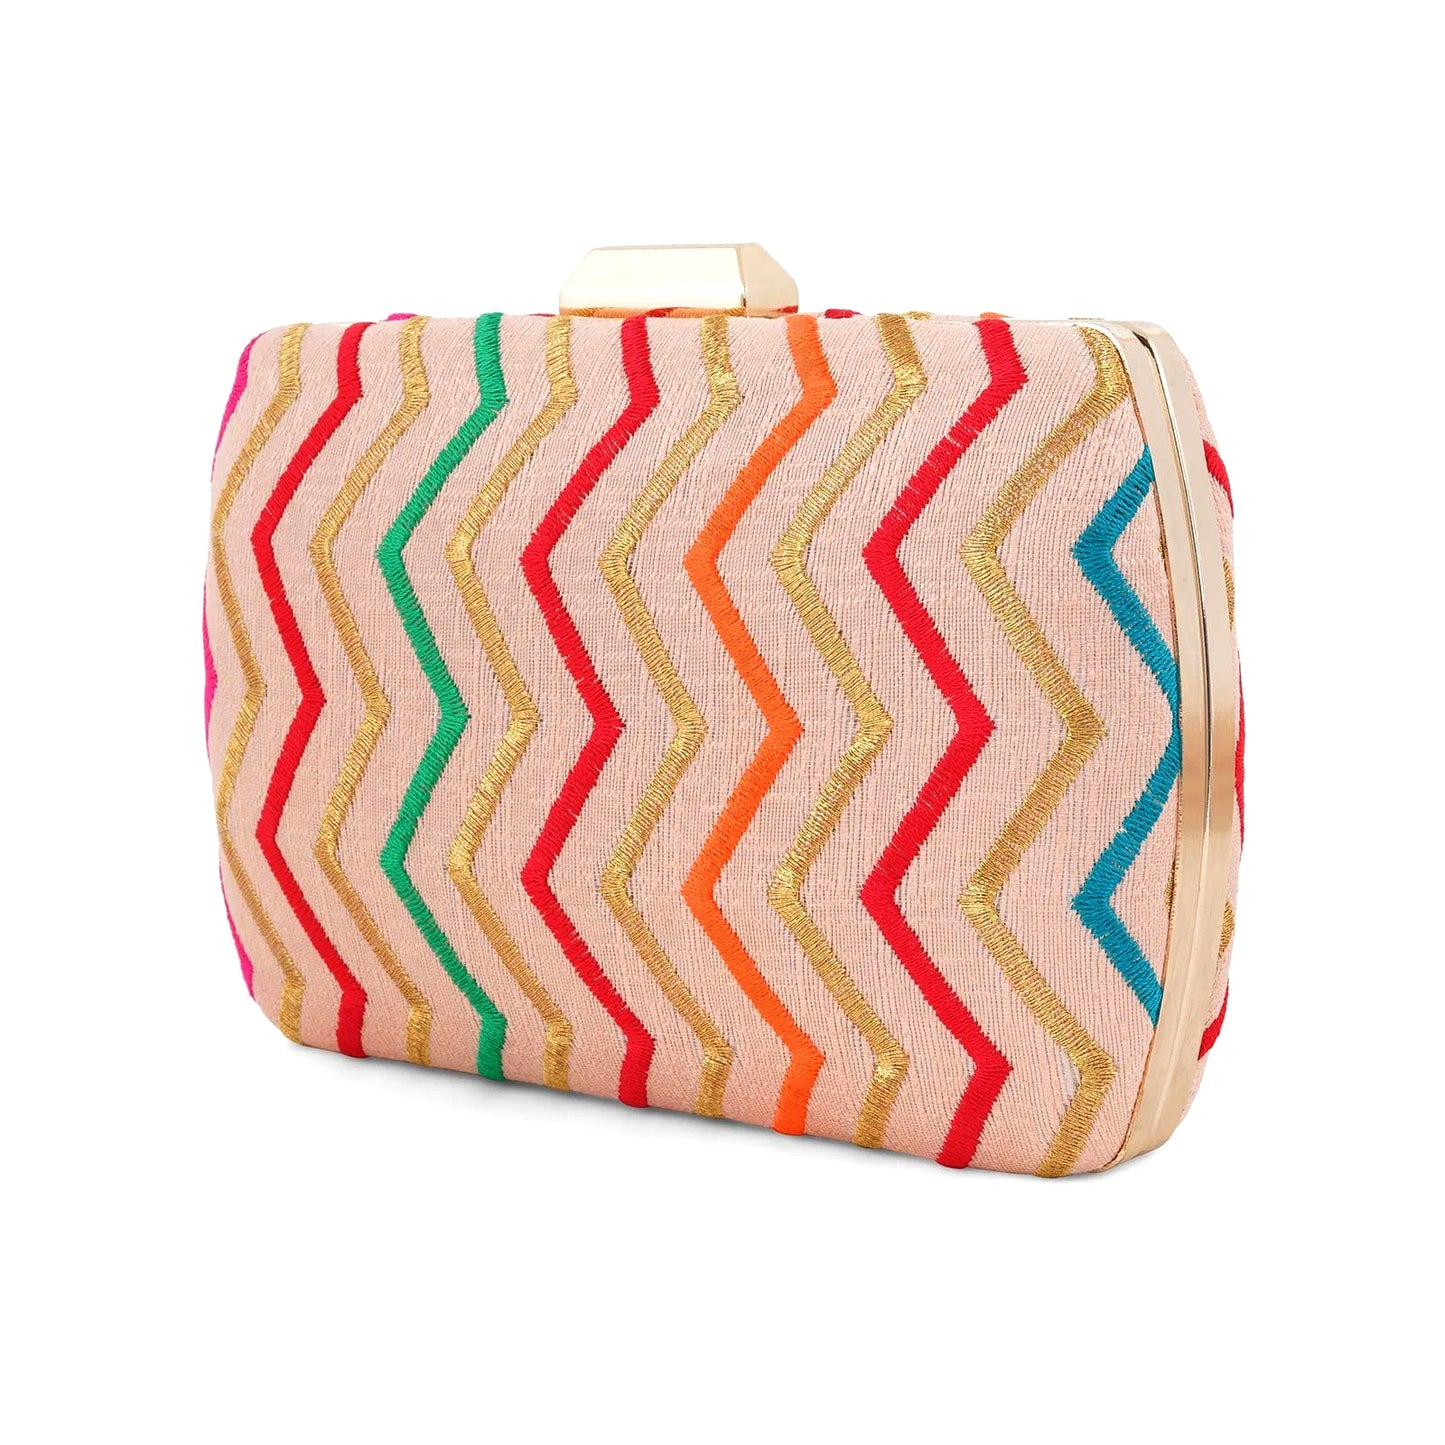 Multicolor Zigzag Embroidered Clutch